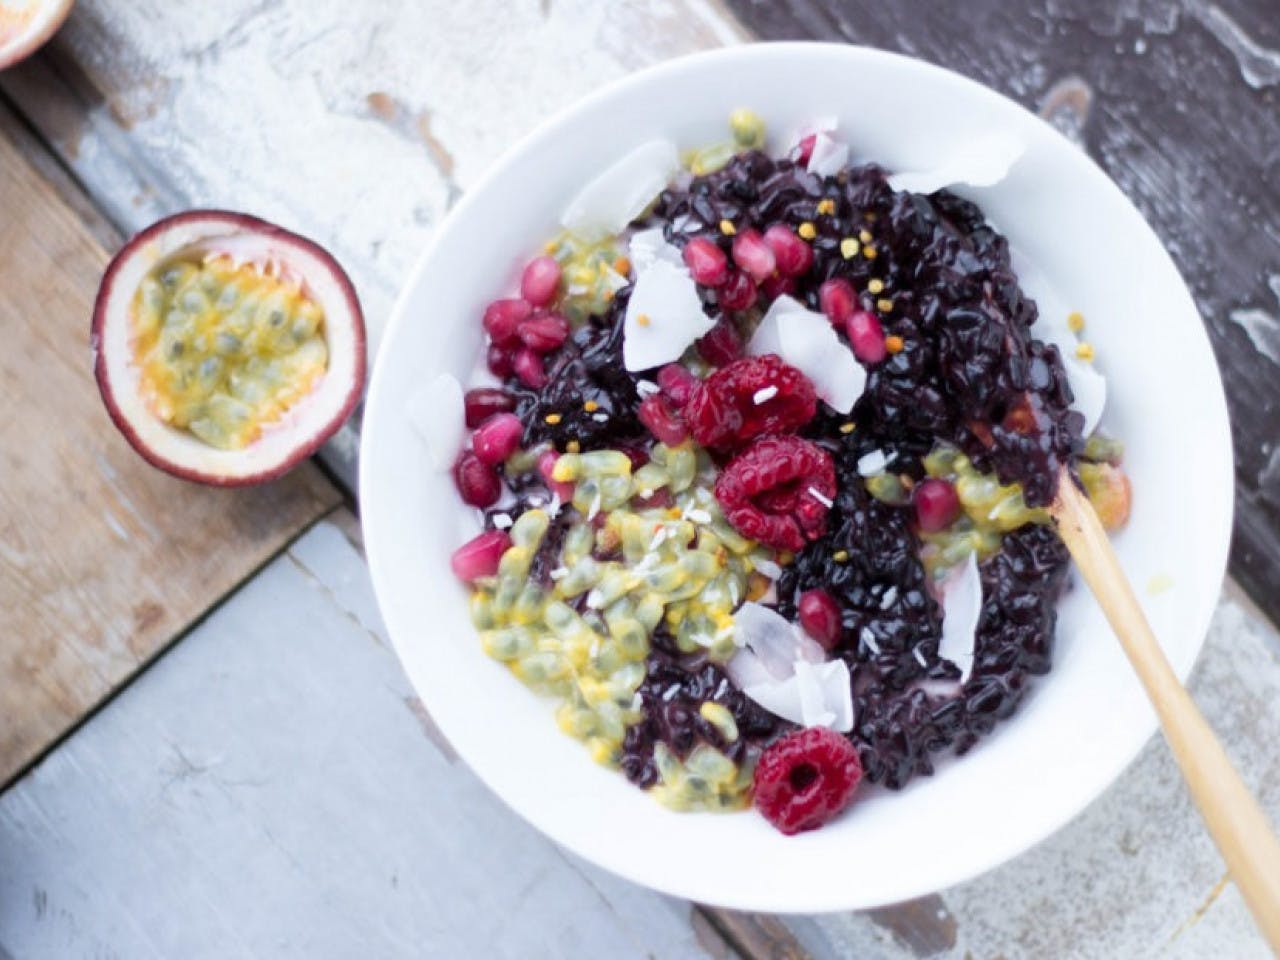 Vegan black rice pudding with fruit, coconut and superfoods